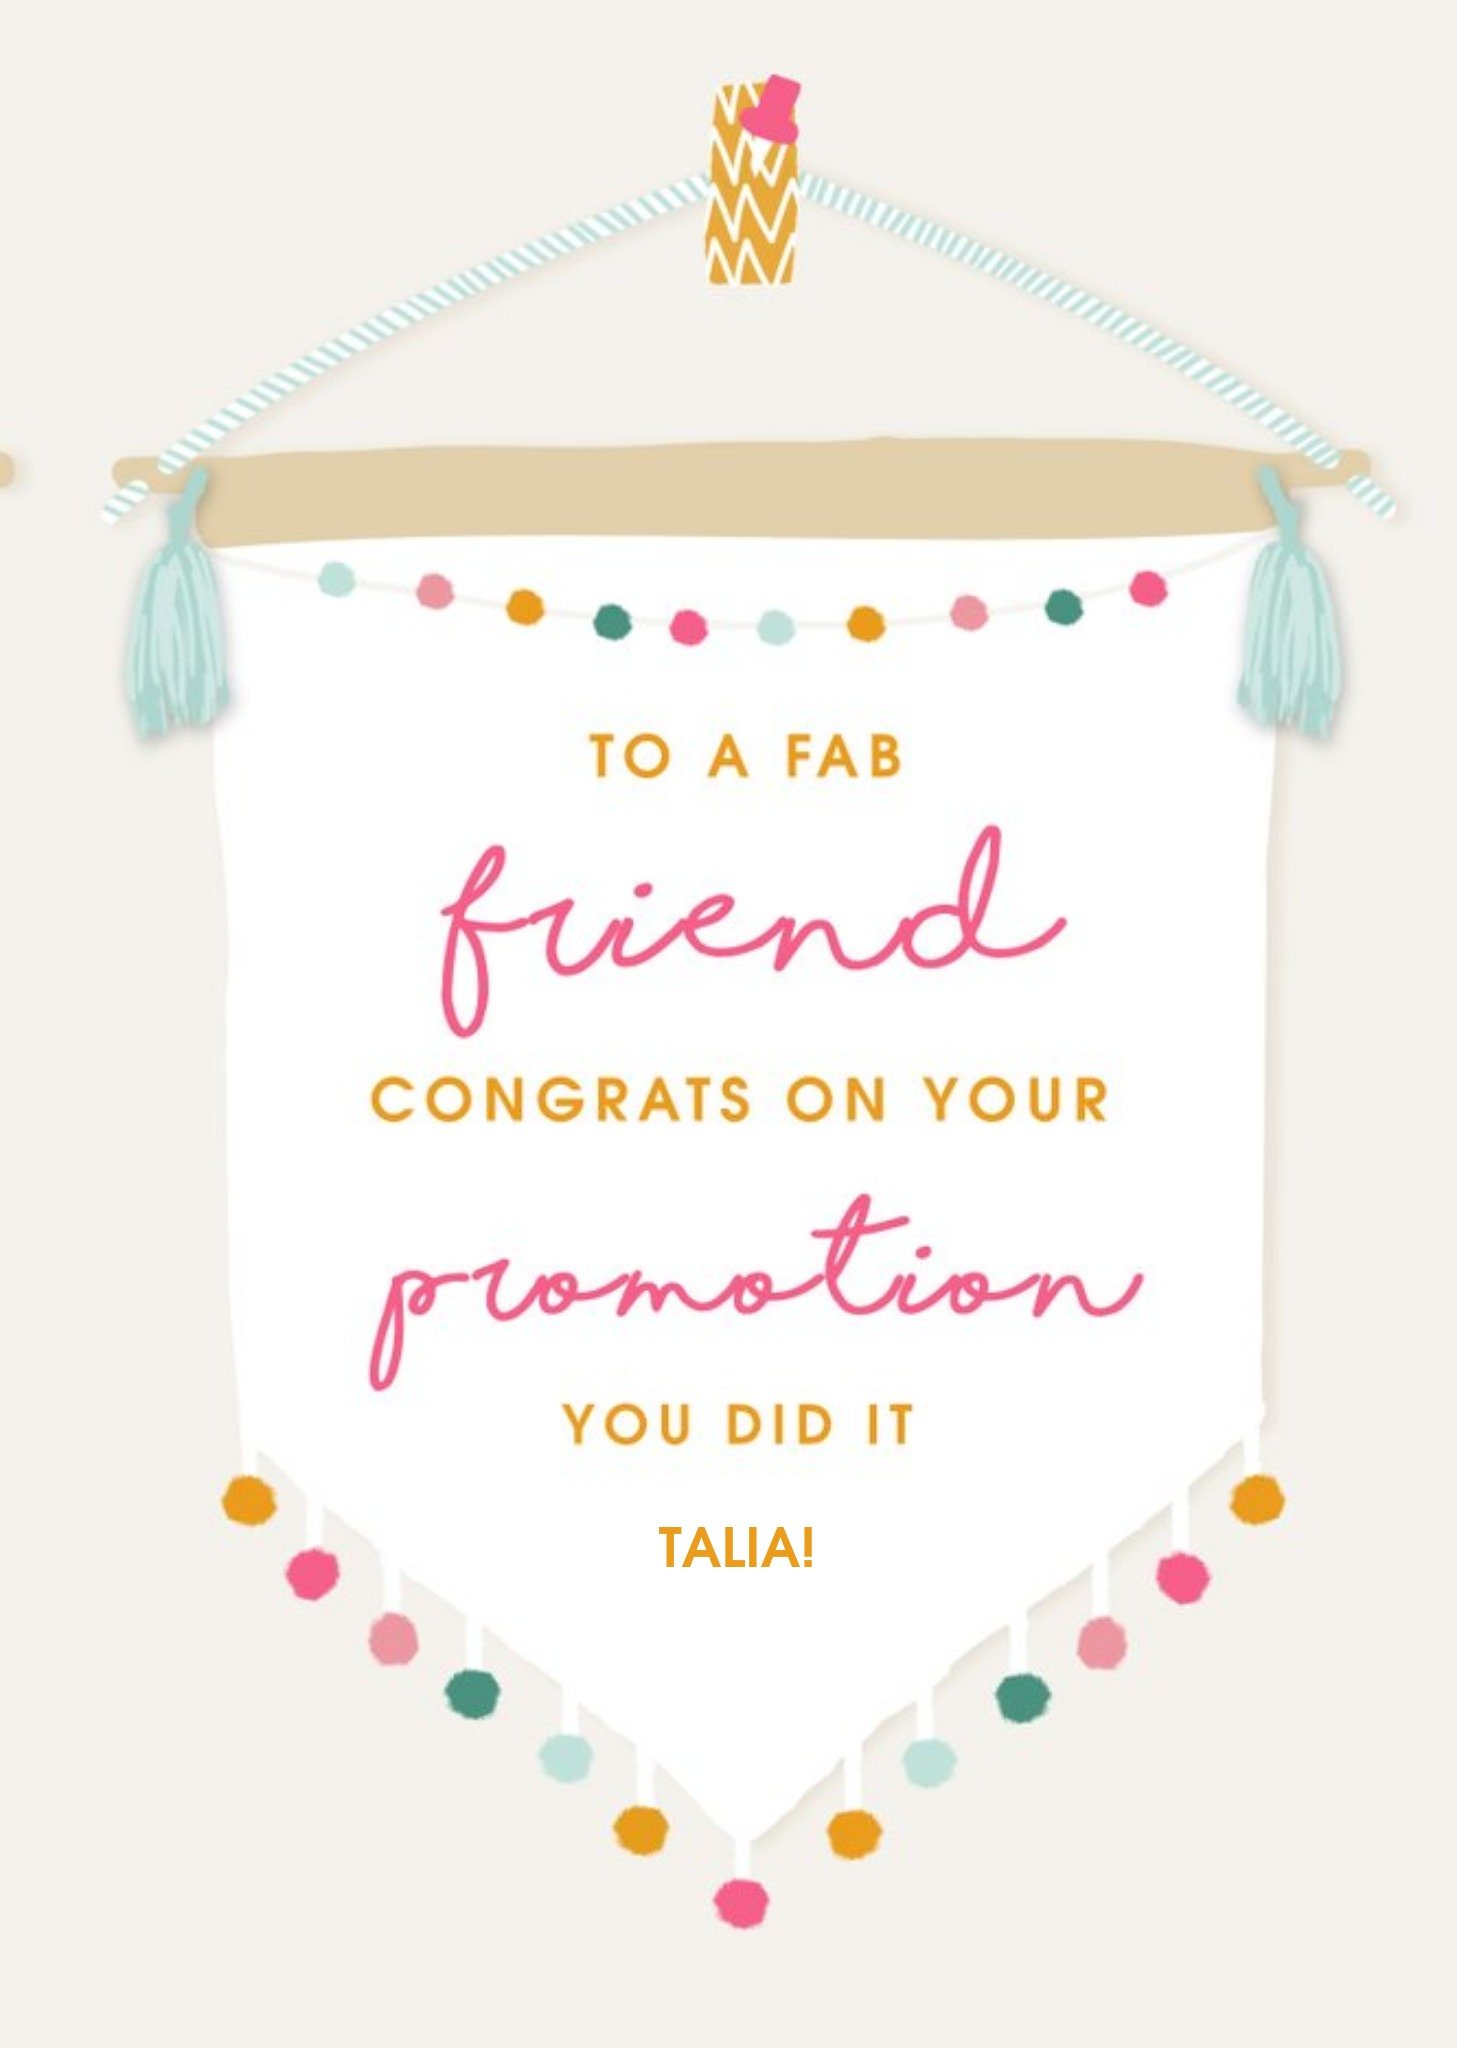 Moonpig Typographic Design To A Fab Friend Congrats On Your Promotion Card Ecard